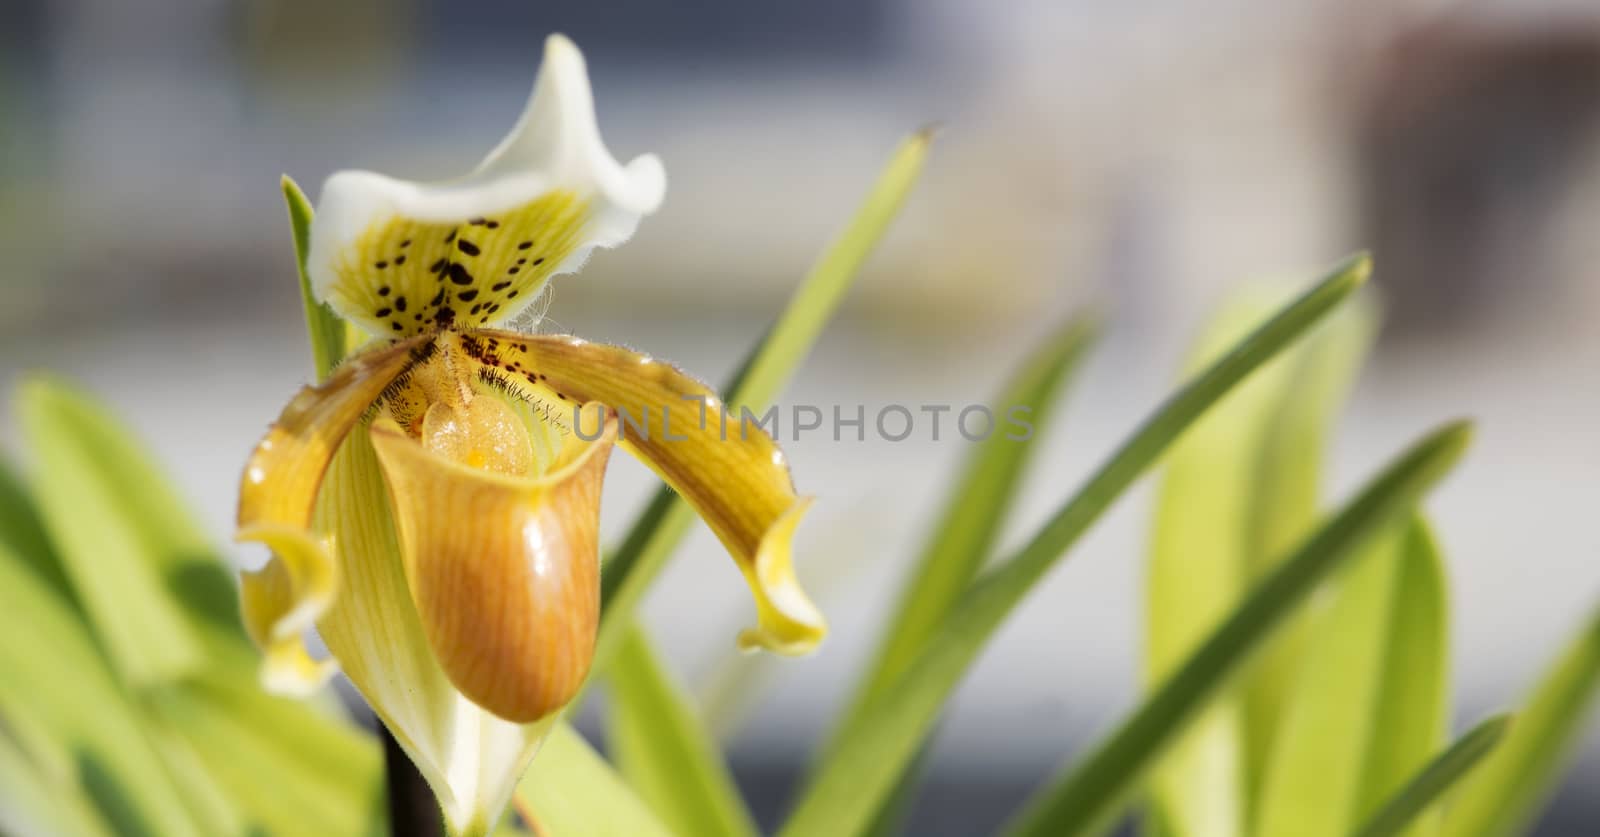 Closeup of yellow blossom Paphiopedilum in outdoor with nature light.